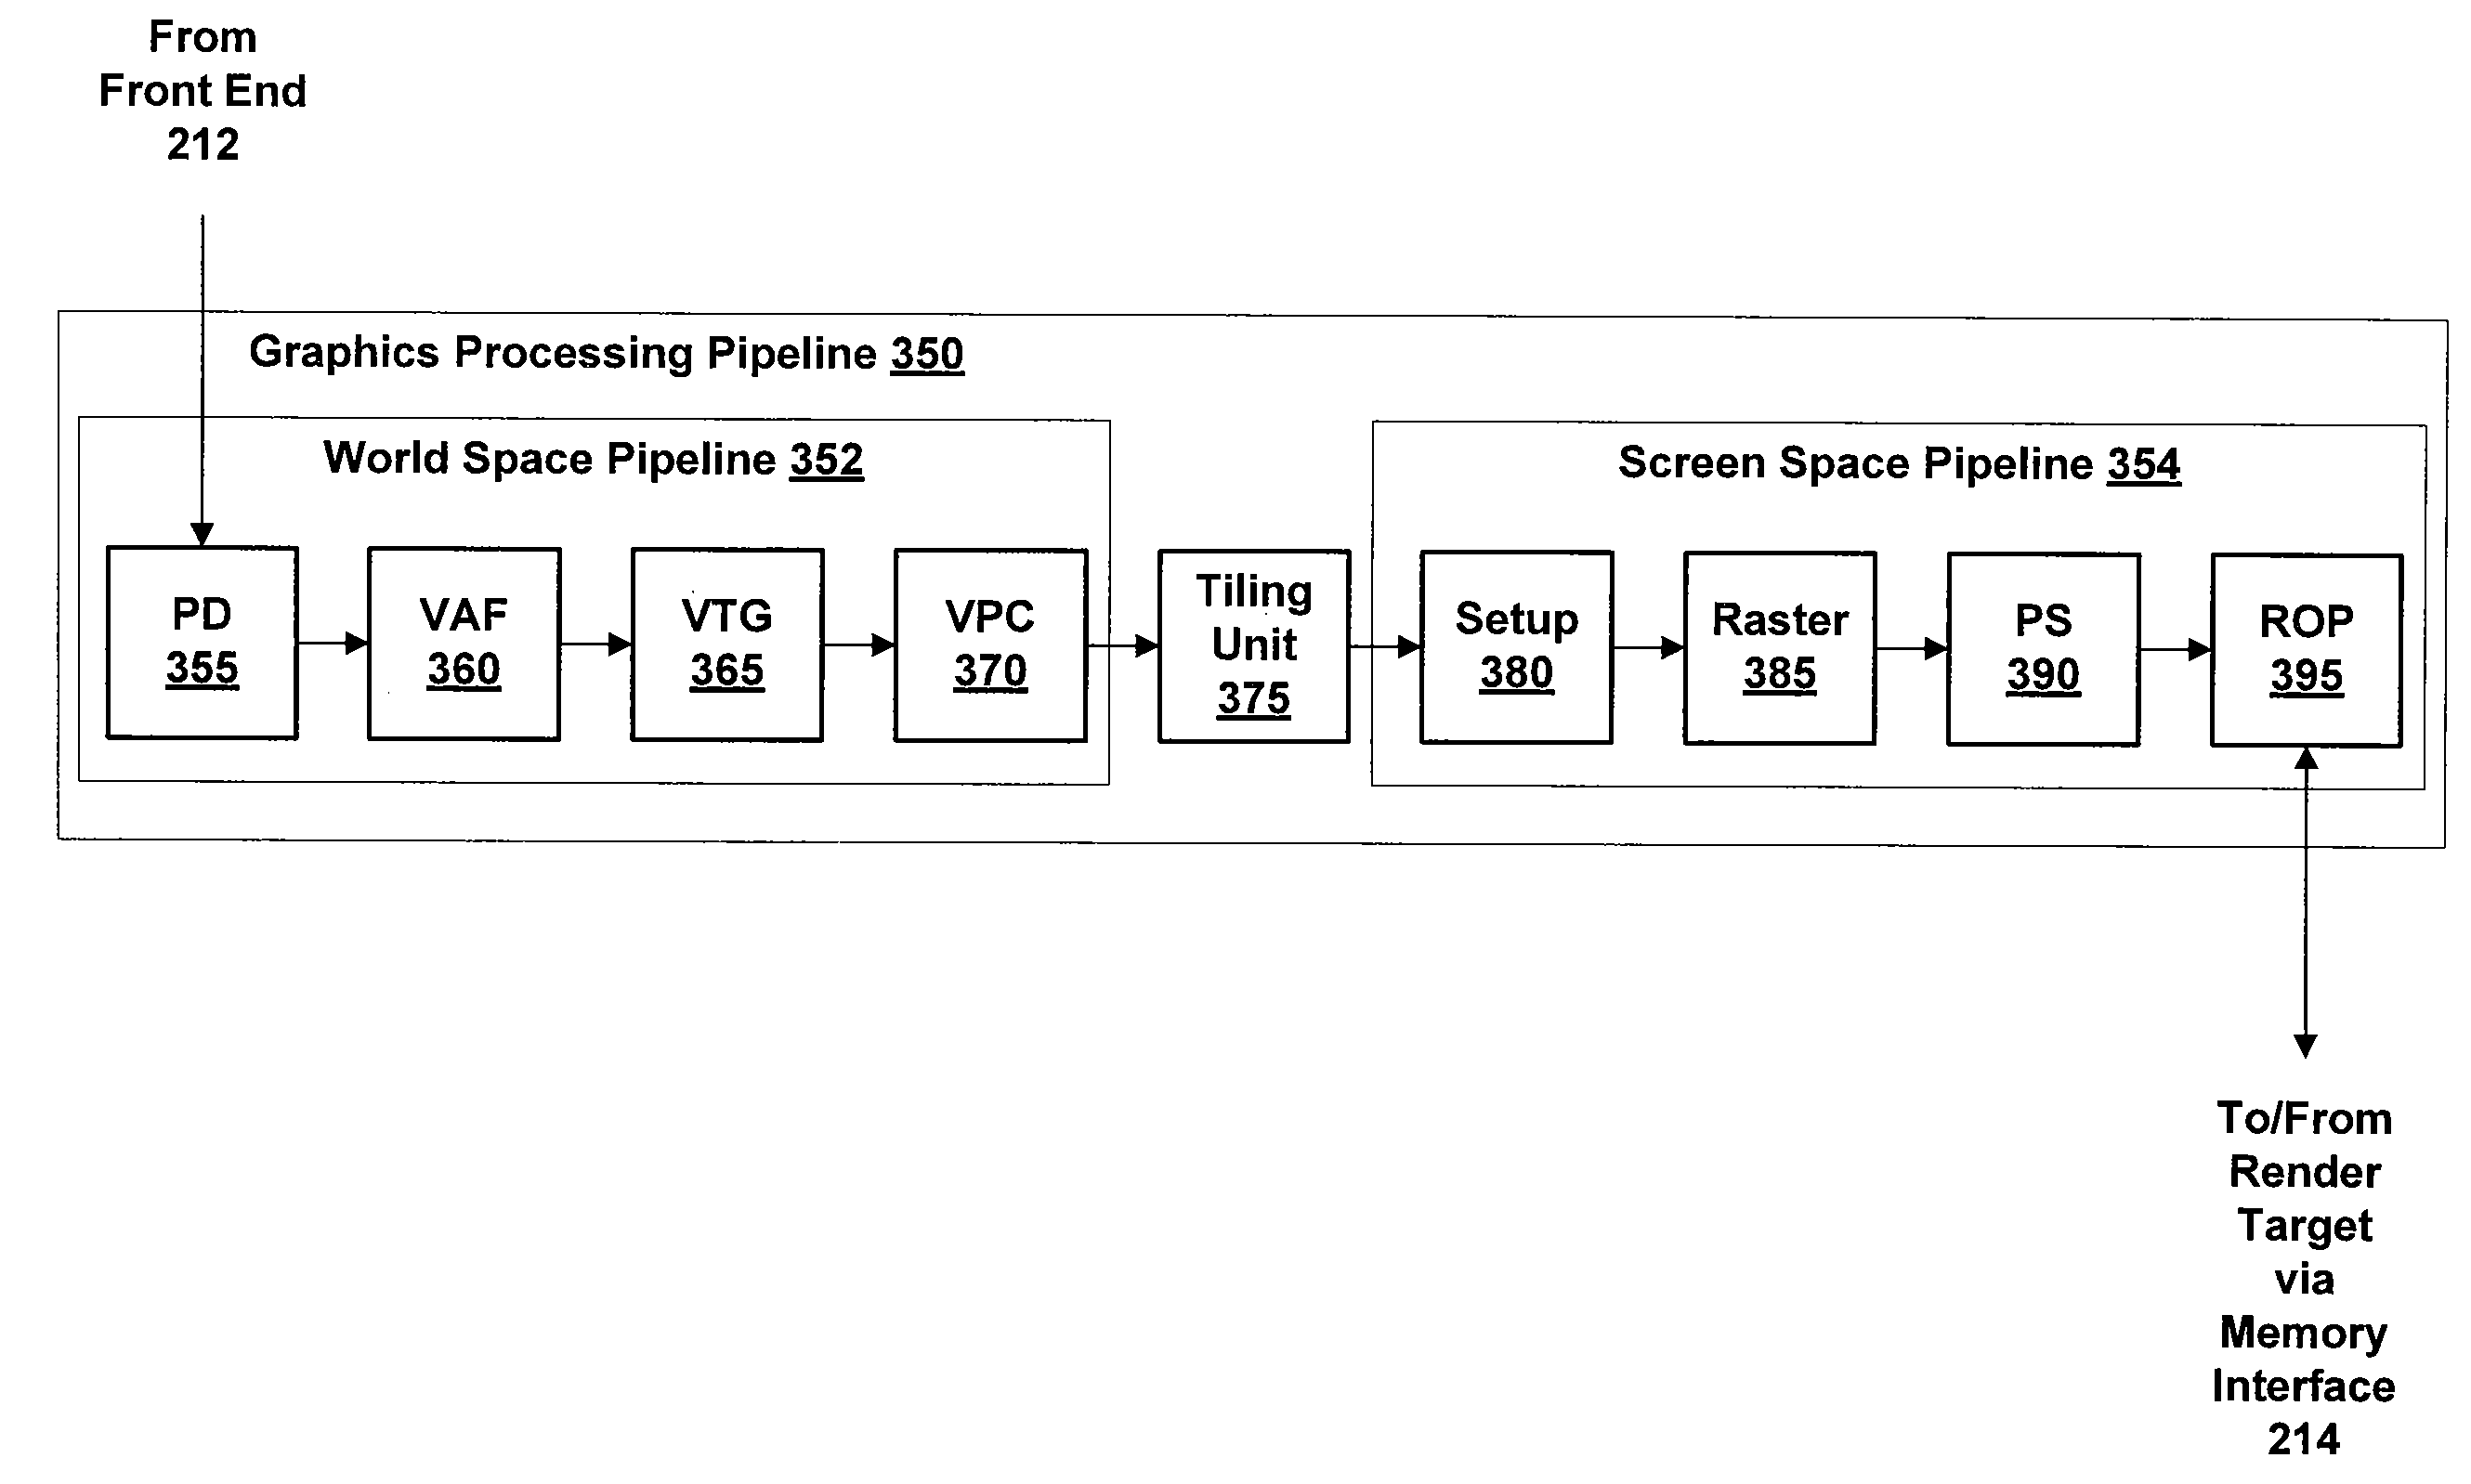 Primitive re-ordering between world-space and screen-space pipelines with buffer limited processing